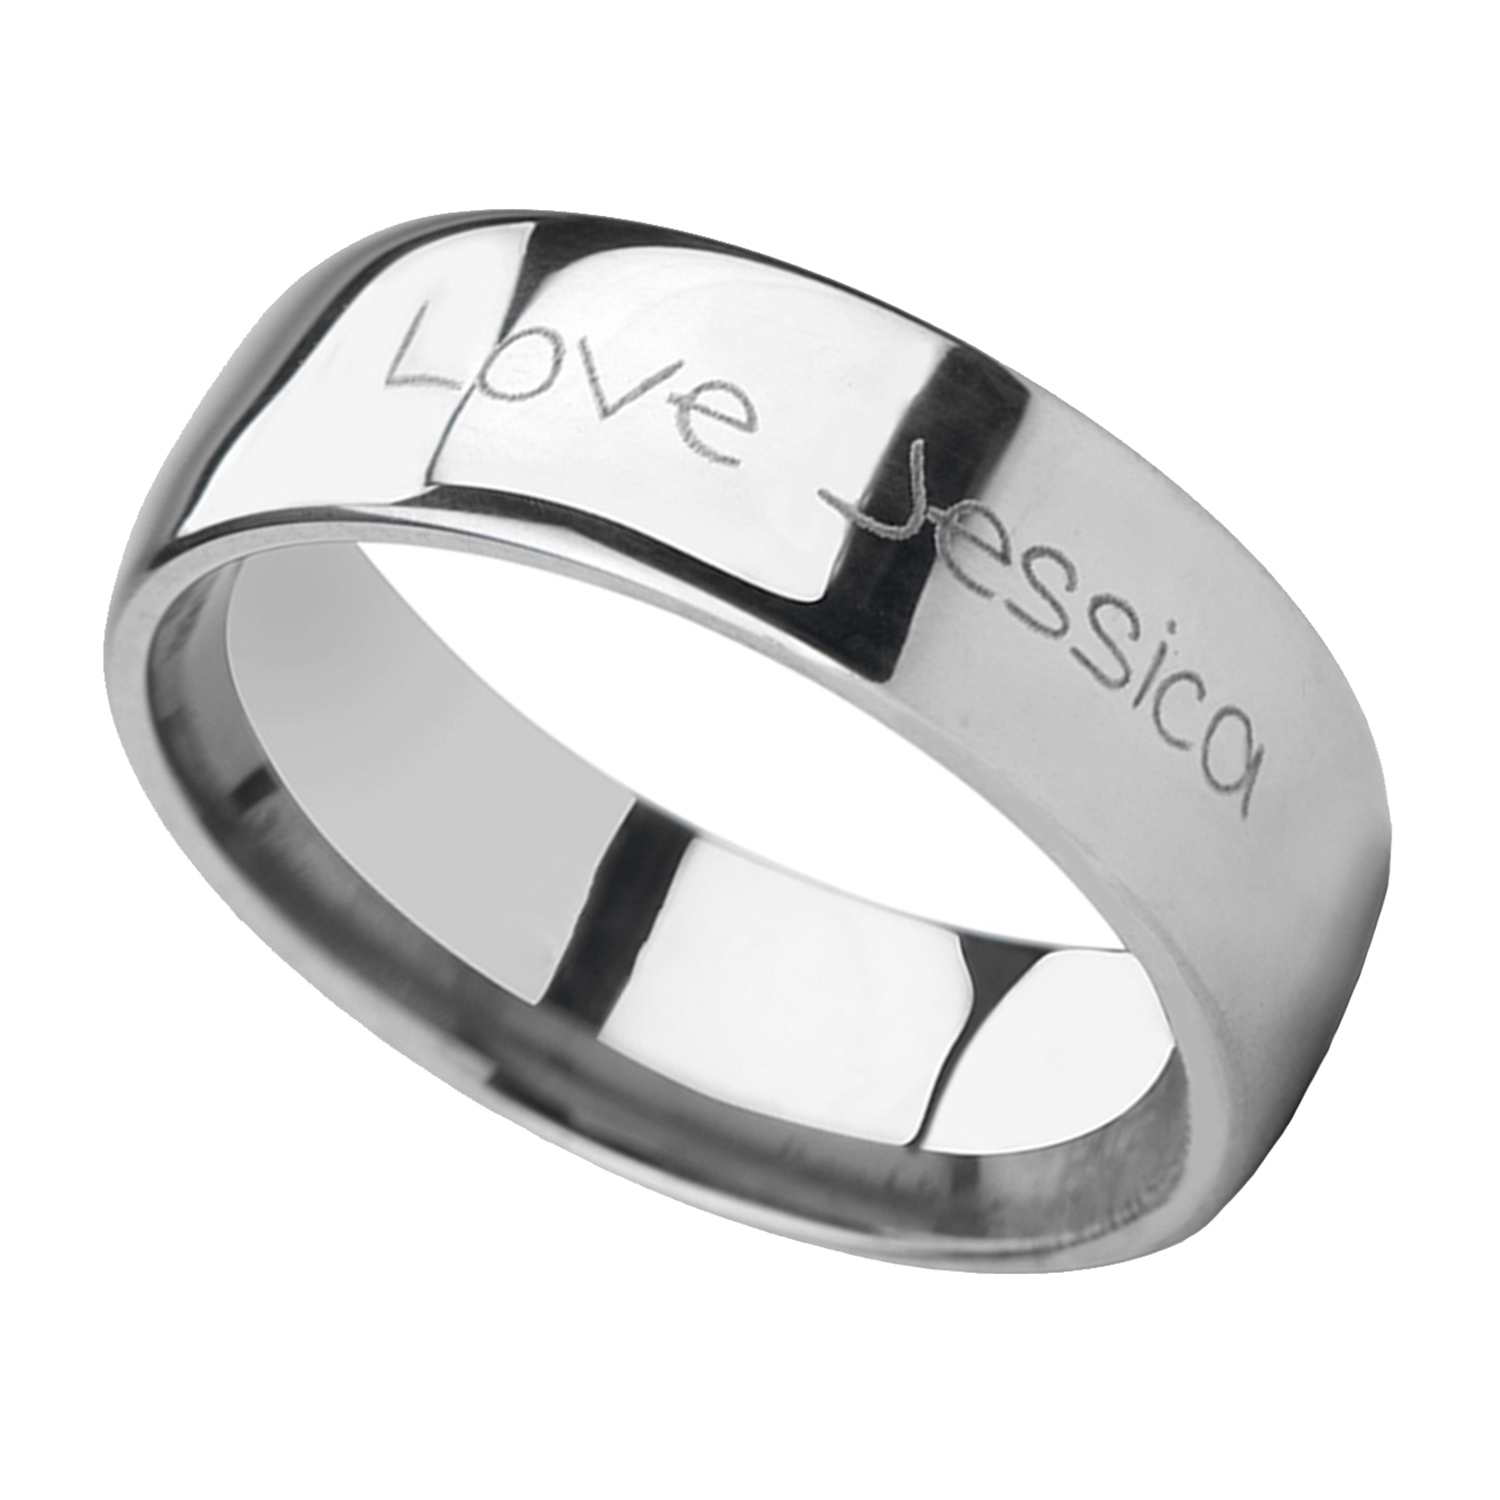 Polished & Domed Handwritten Engraved Tungsten Ring (6MM)